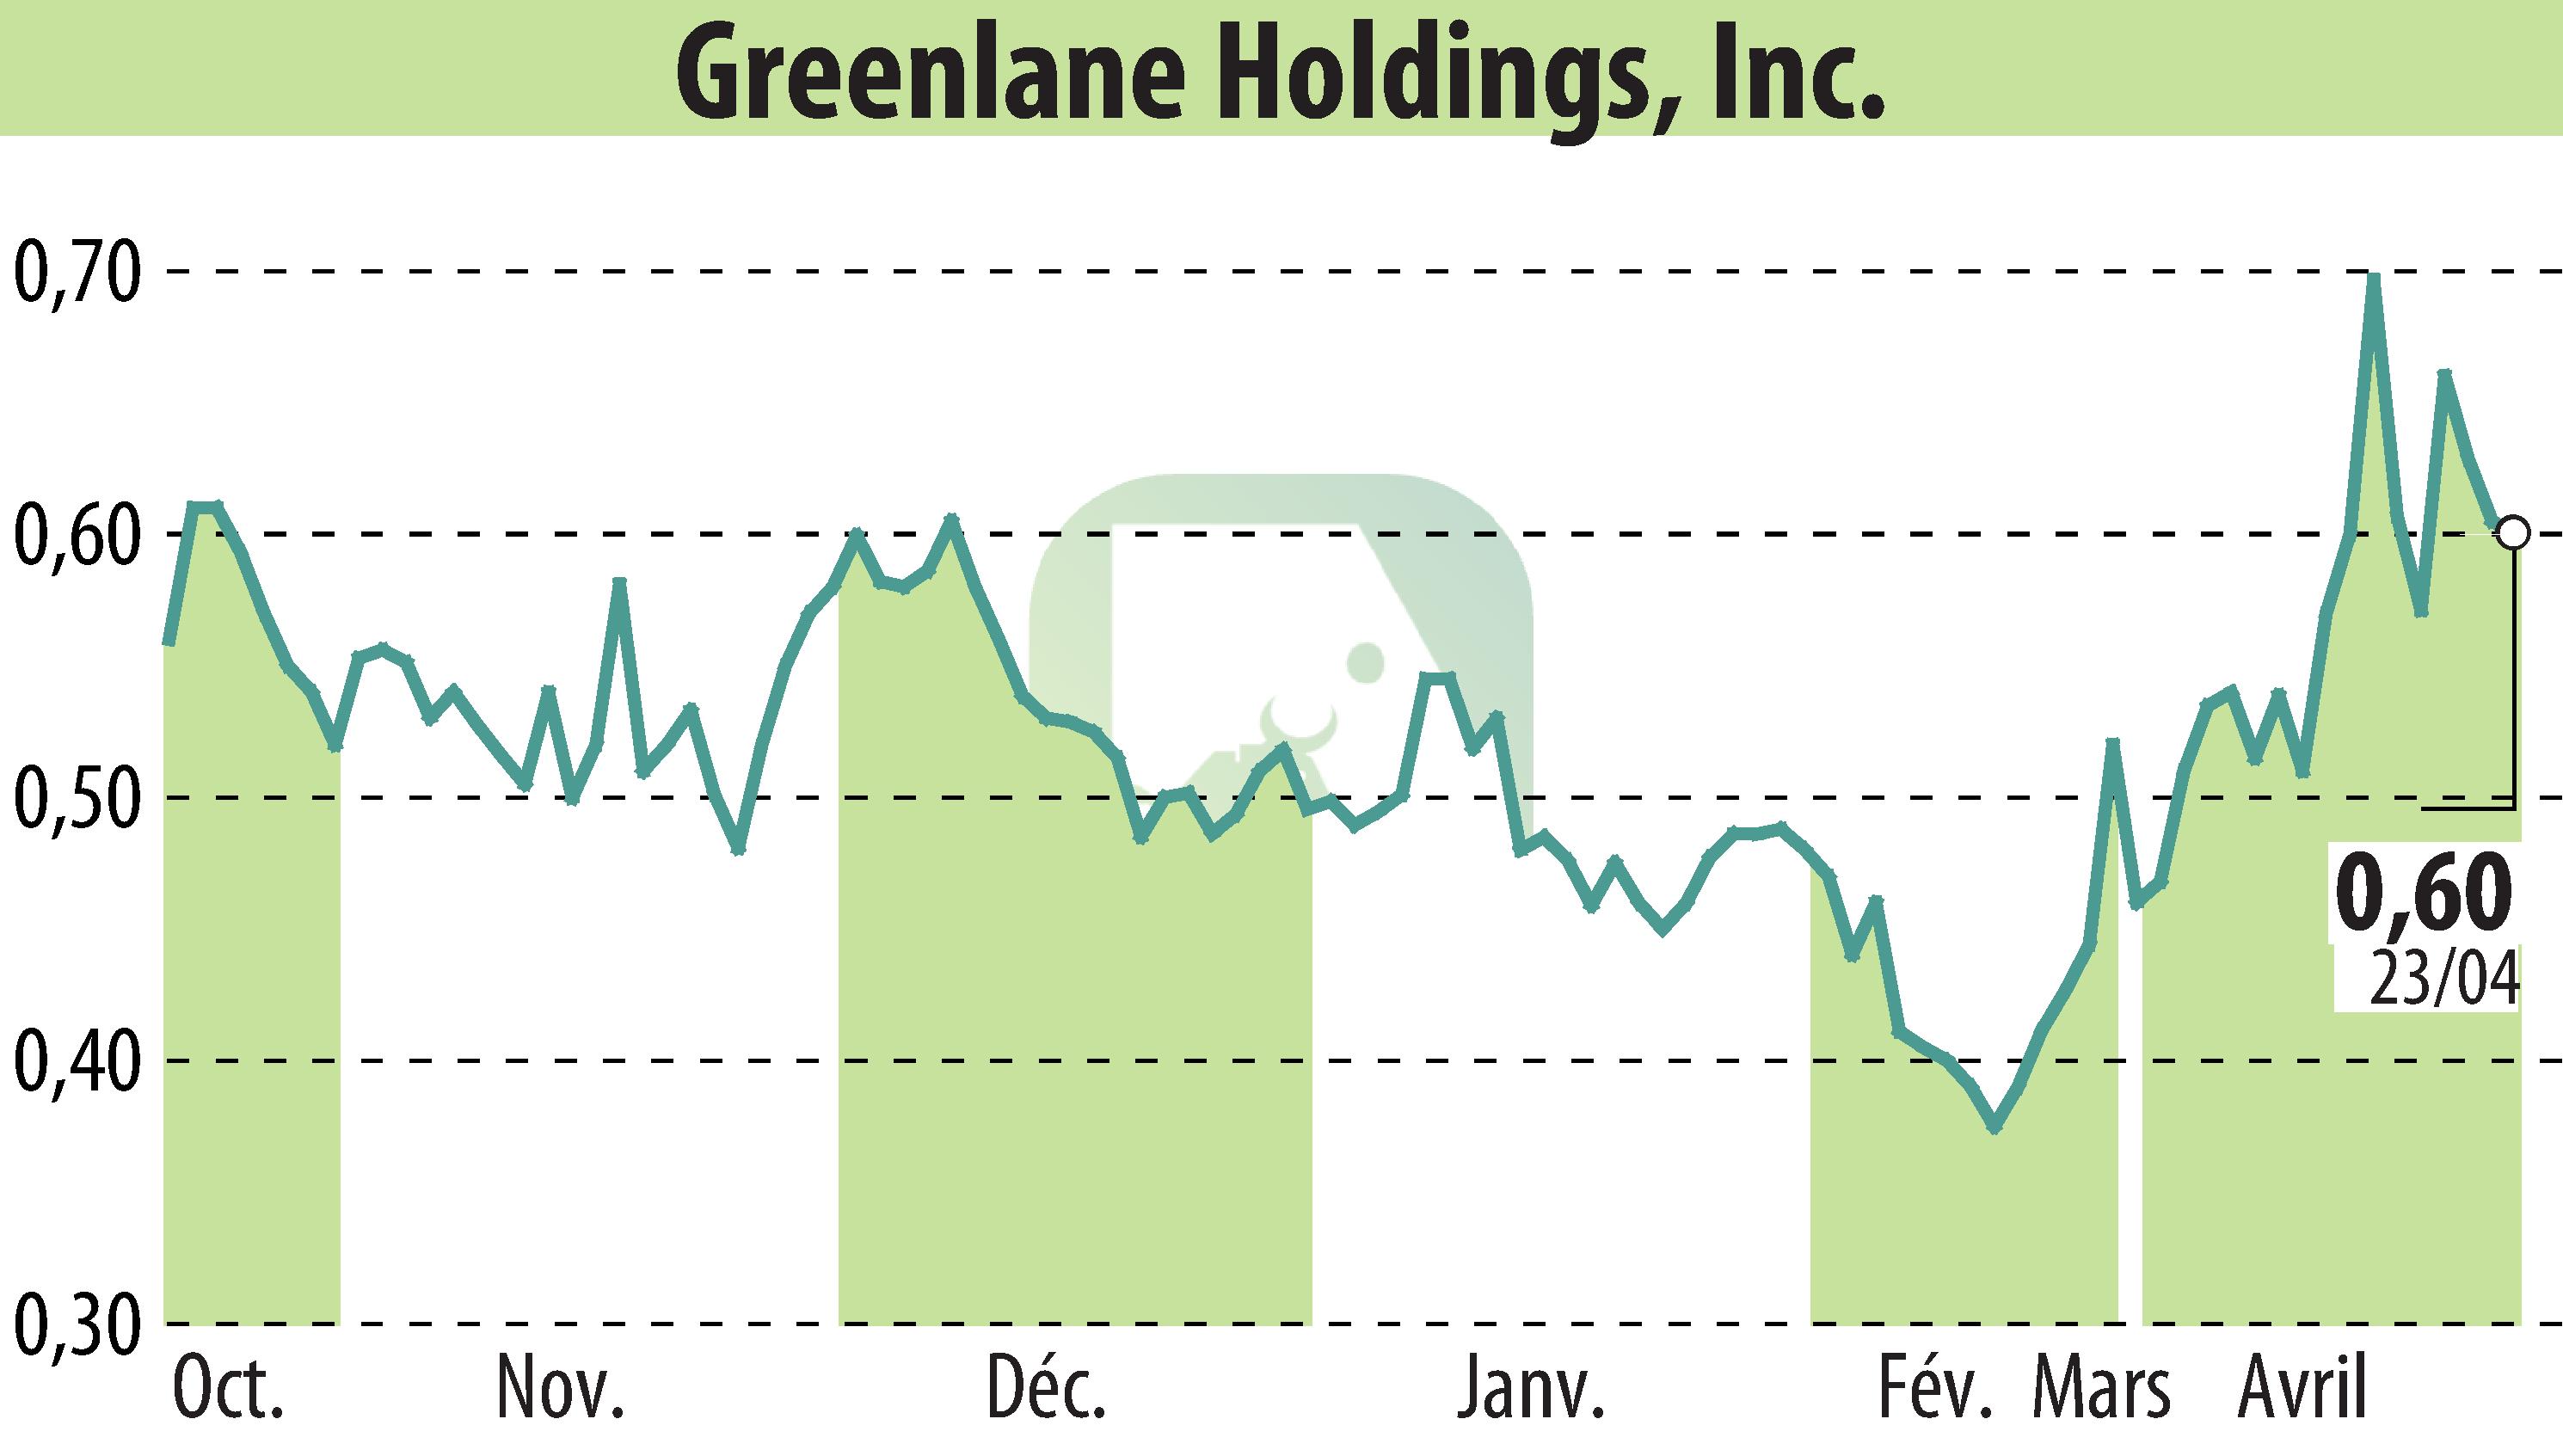 Stock price chart of Greenlane Holdings, Inc. (EBR:GNLN) showing fluctuations.